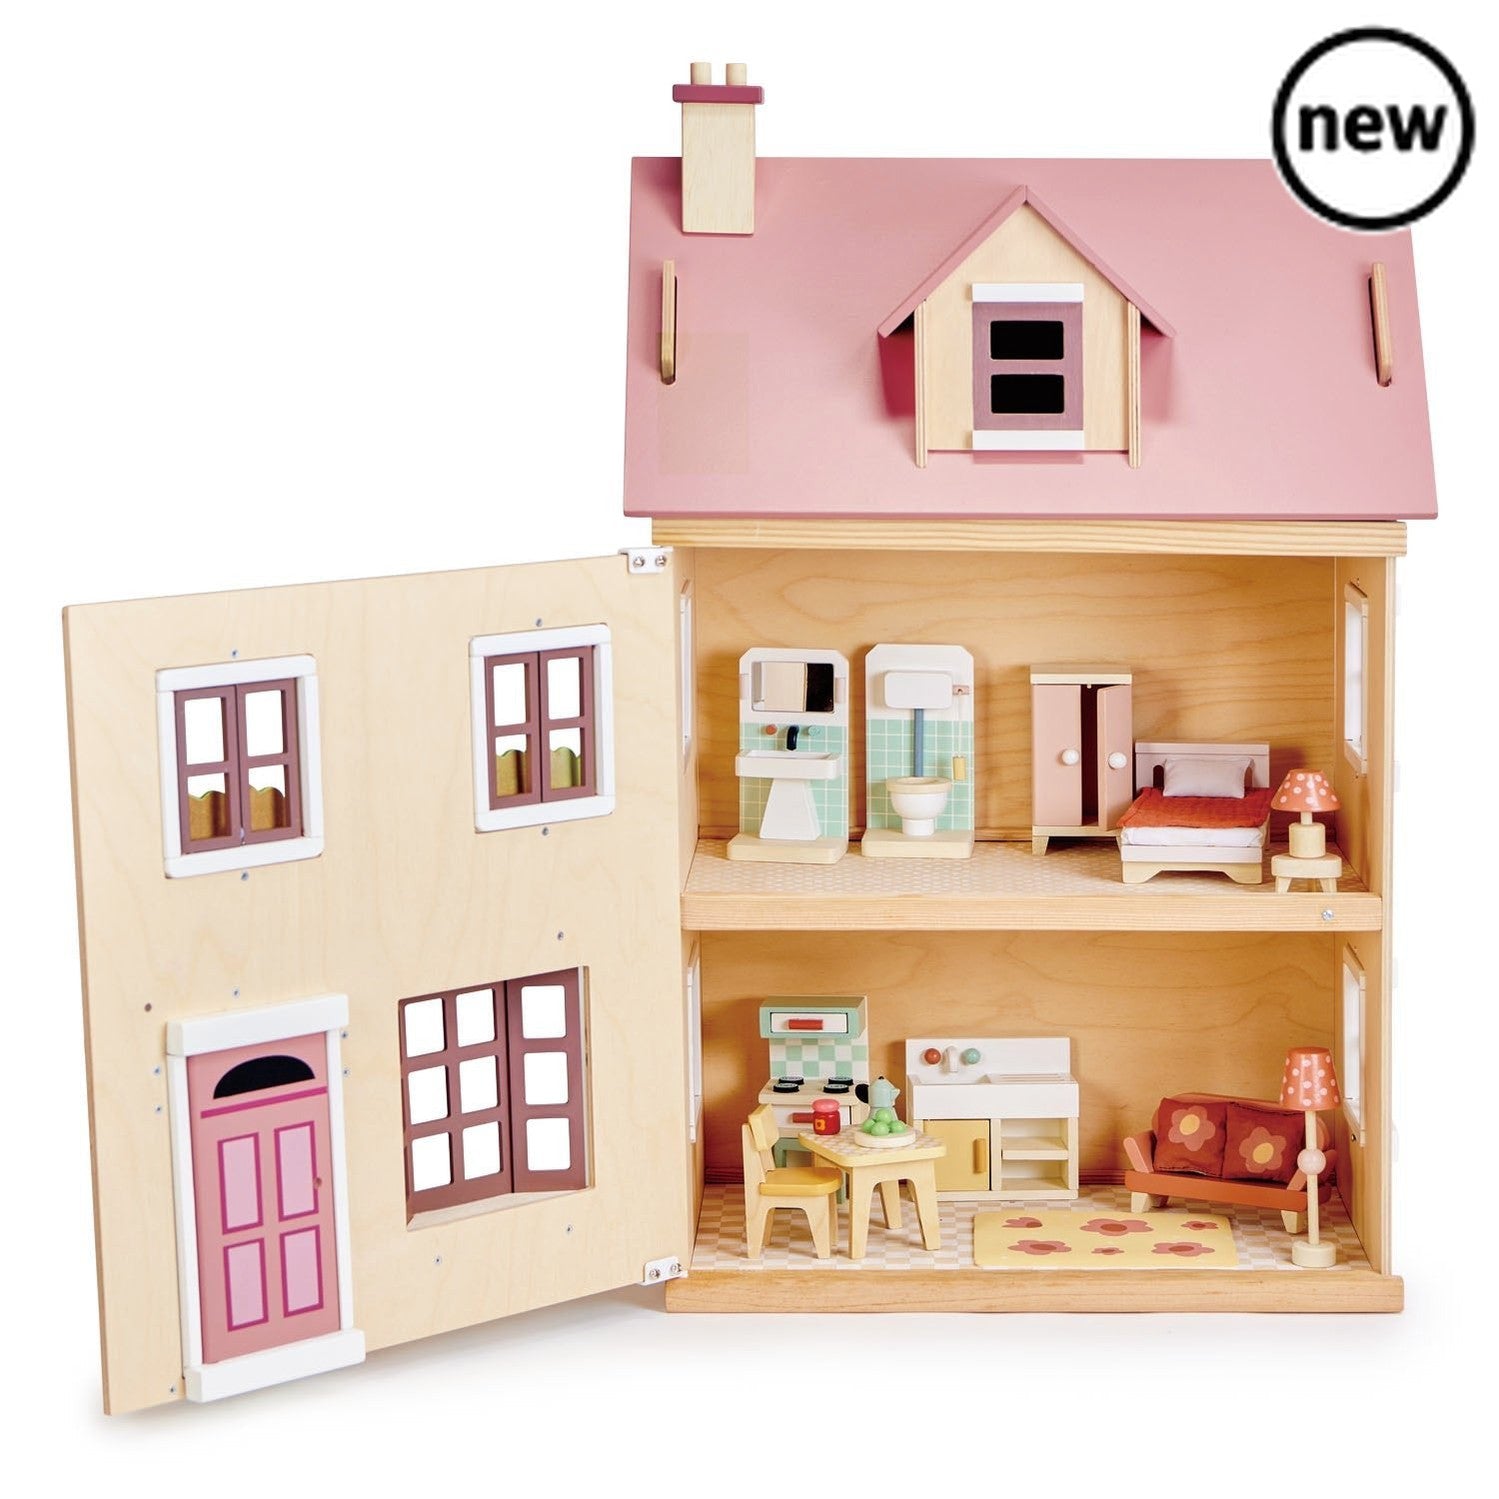 Tenderleaf Foxtail Villa (Pink), Introducing Foxtail Villa, the ultimate town style dolls house that combines exquisite design with endless playtime possibilities. Crafted with careful attention to detail, this mid-sized dolls house is adorned with subtle colors, making it an enchanting addition to your little one's toy collection.With a cleverly designed roof that effortlessly lifts and holds, accessing the attic has never been easier. Let your child's imagination soar as they create their own little world